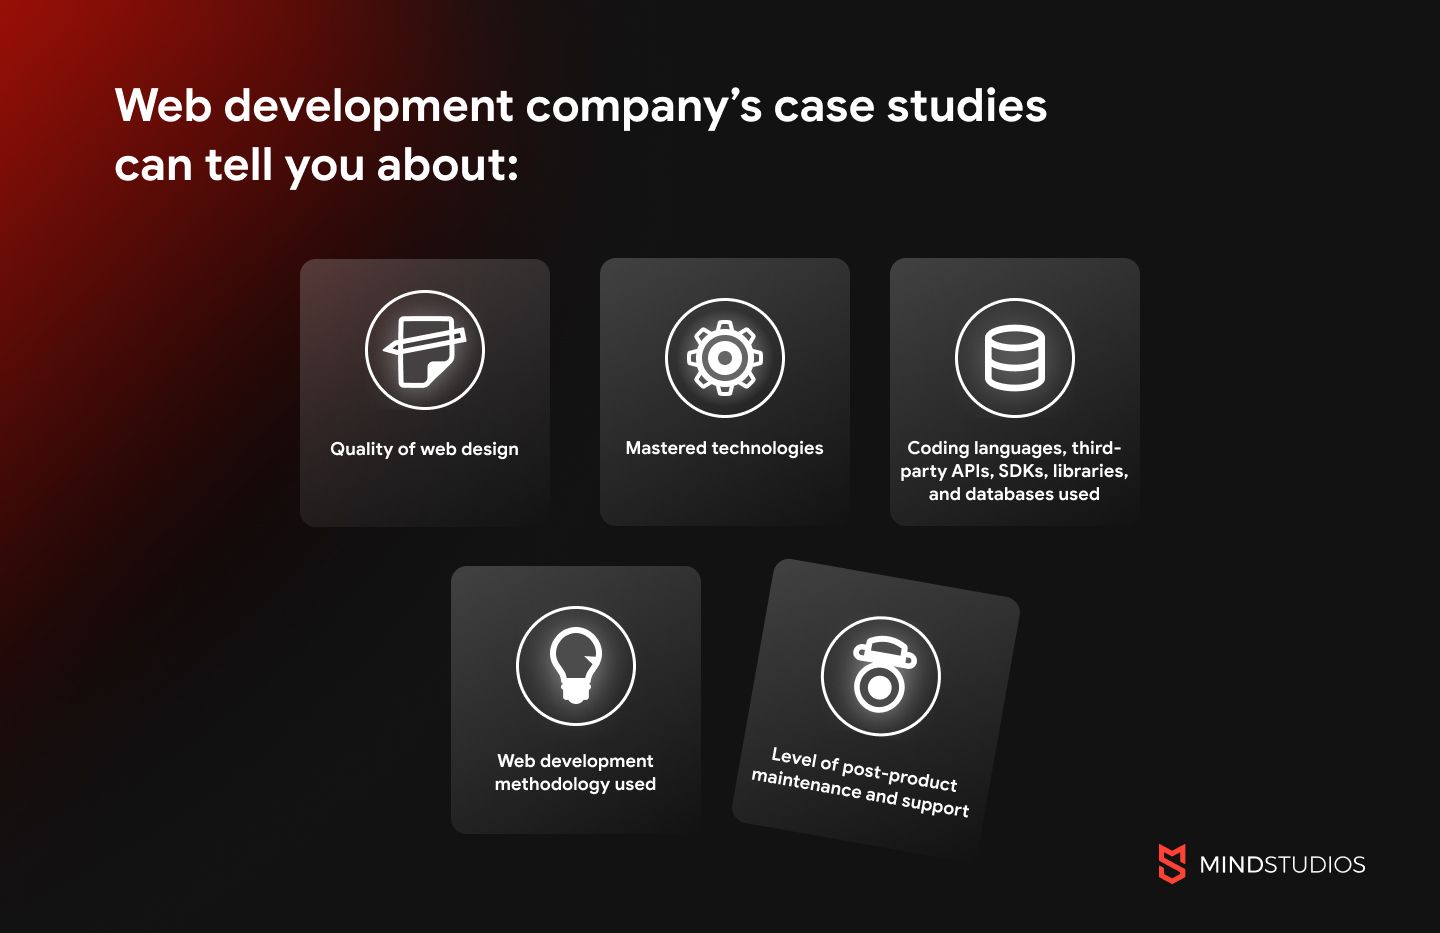 A web development company's case studies can tell you about